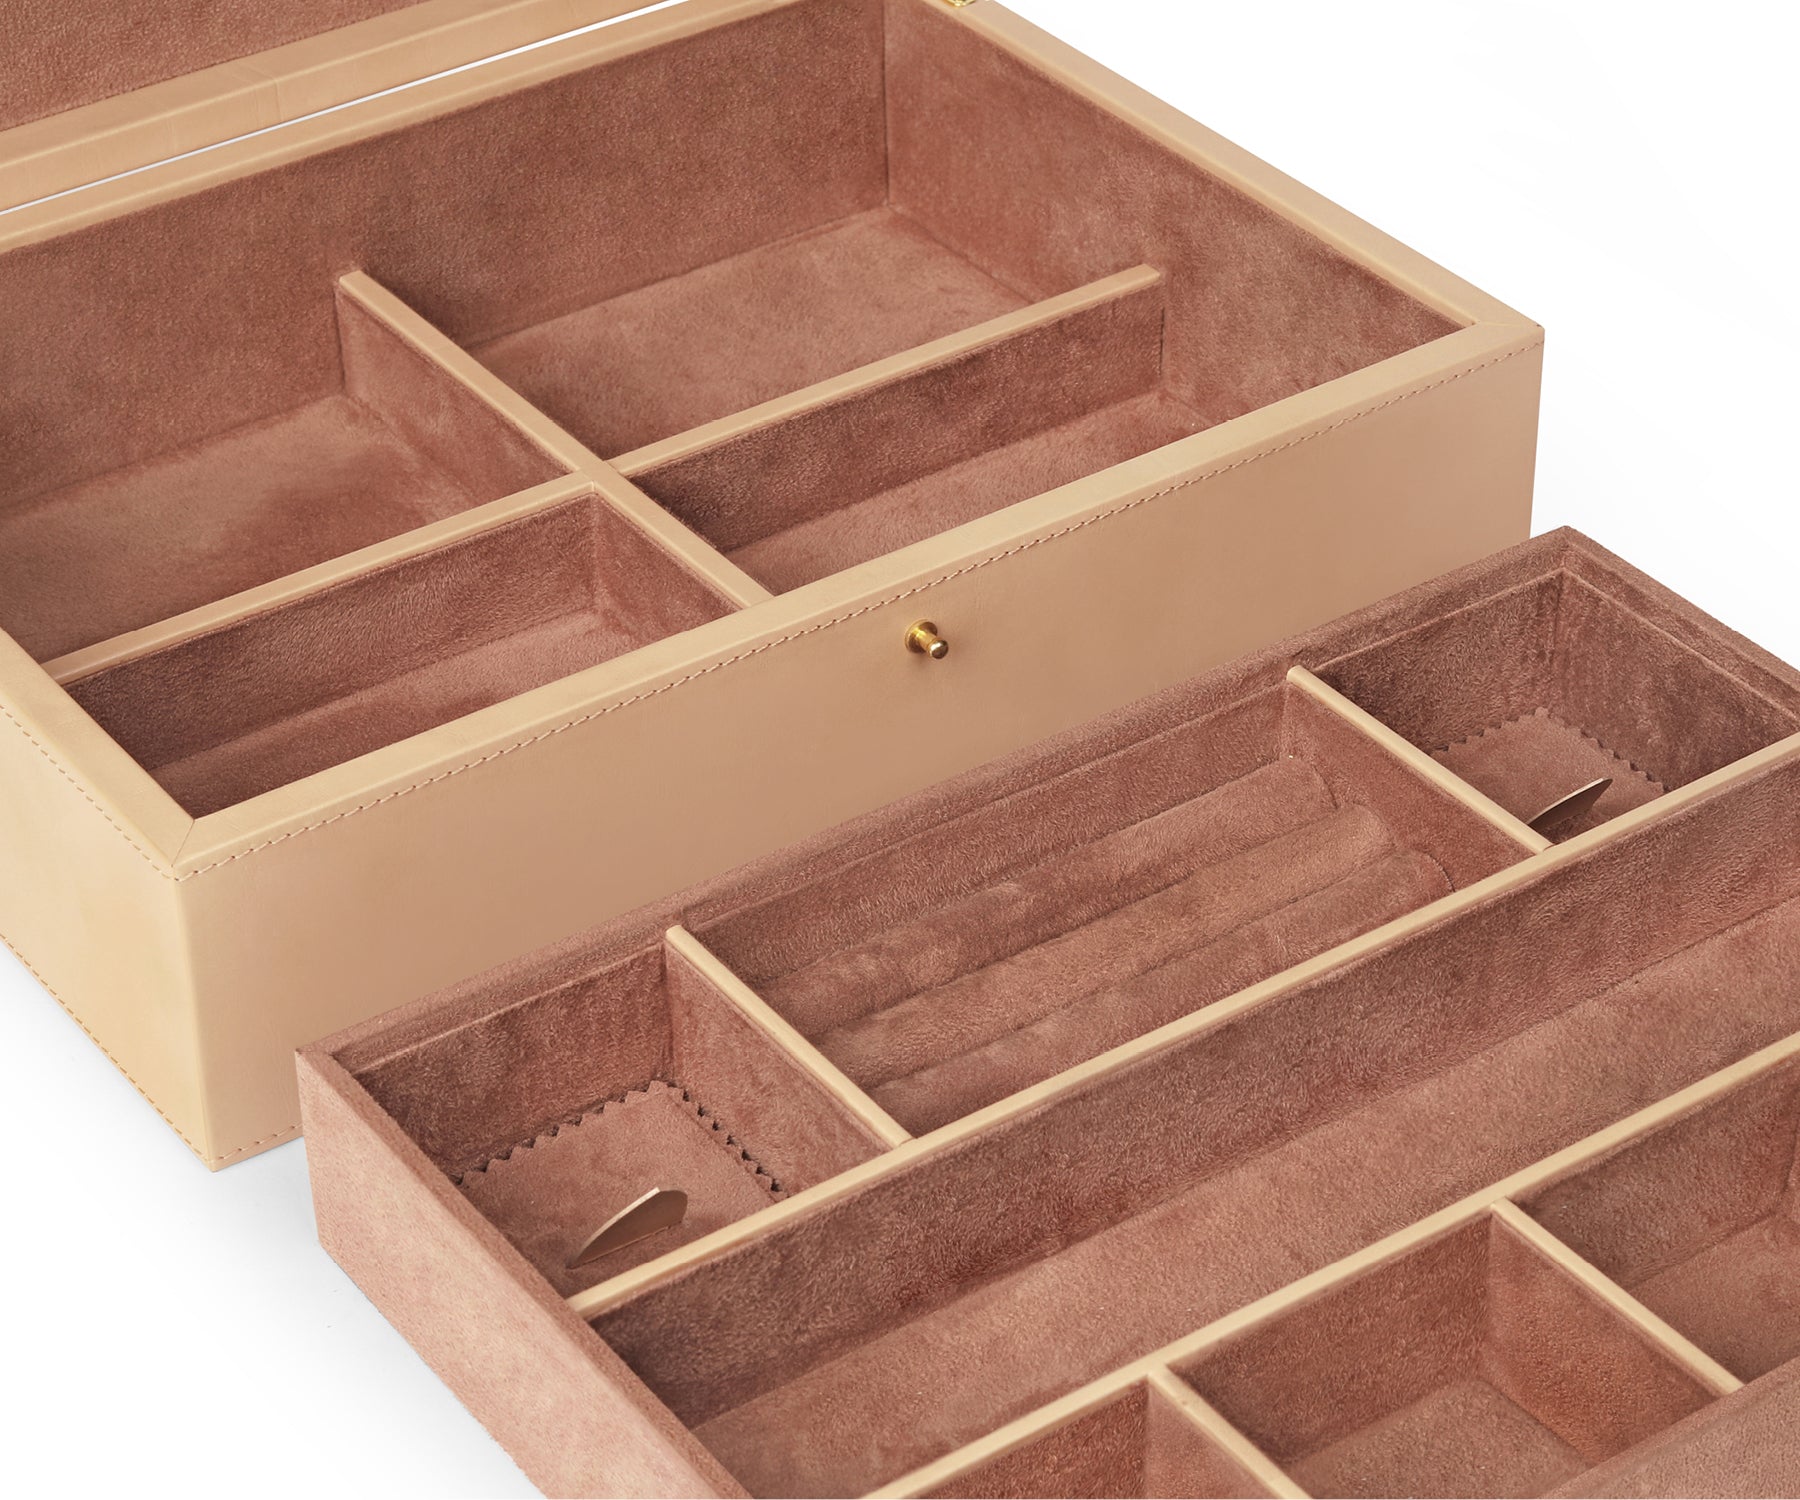 Buy Nude Tesoro Jewellery Box - Comes with Pull-Out Tray - Taamaa